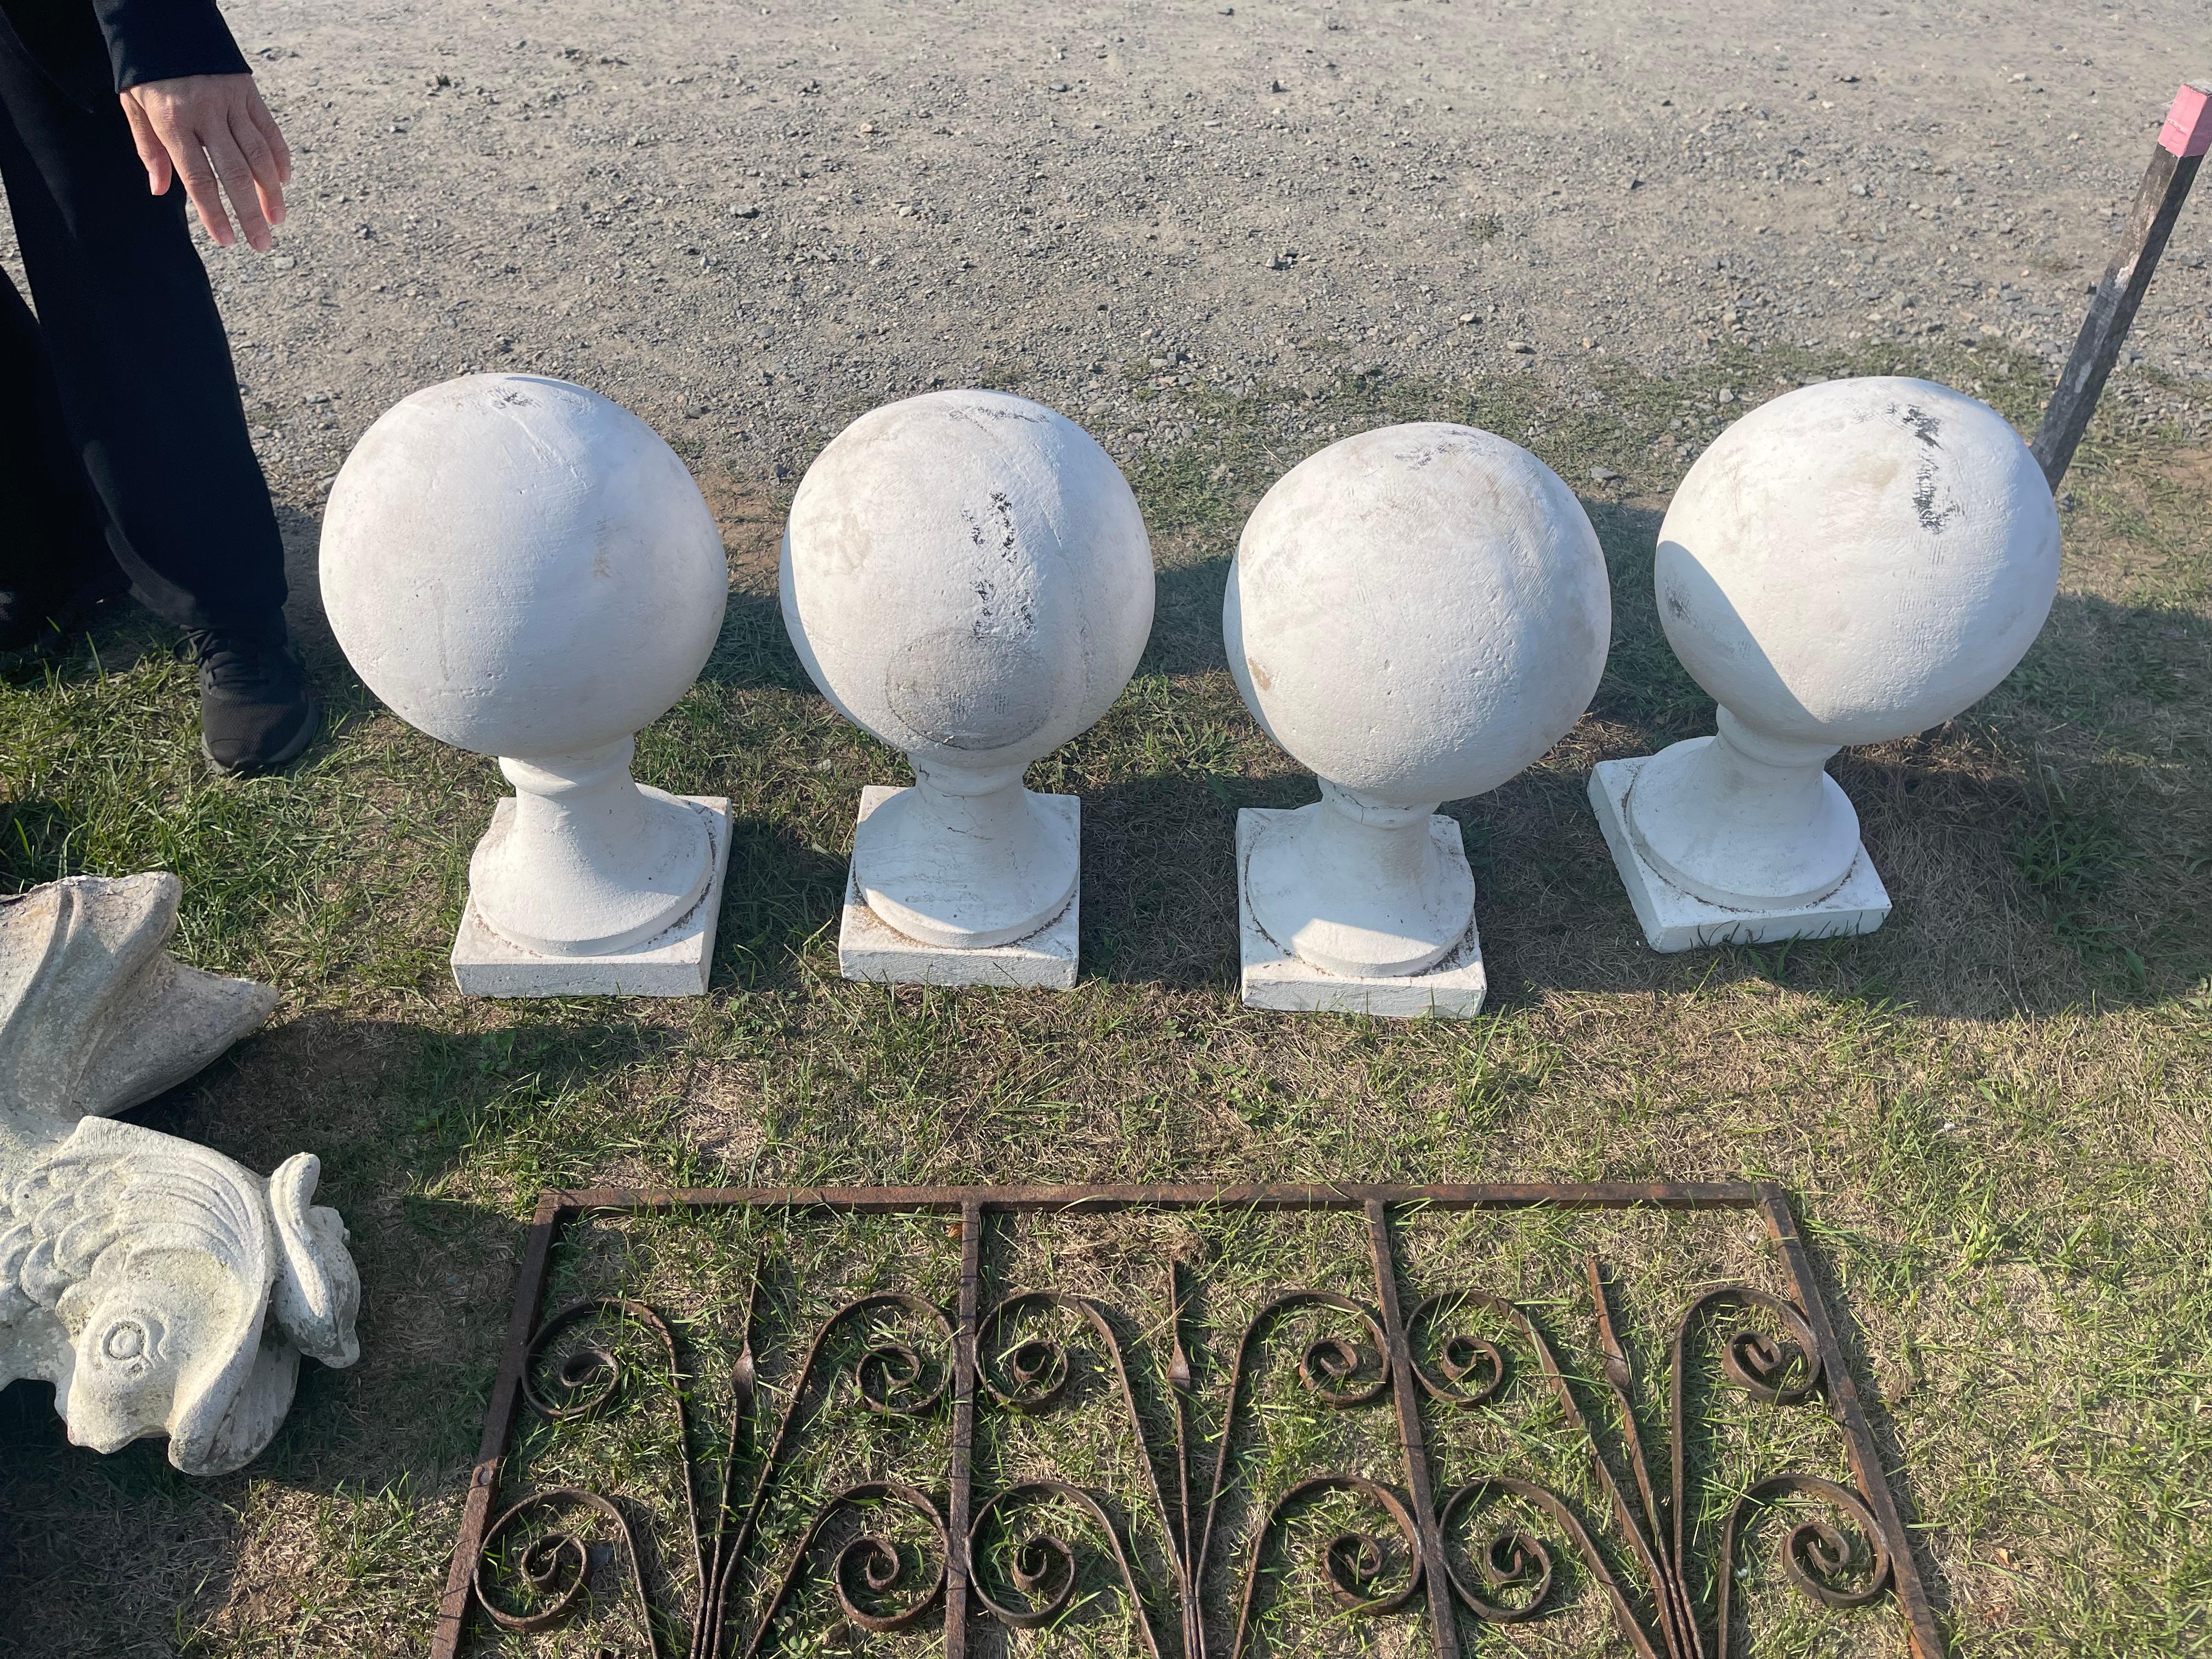 A set of four cement ball finials on pedestal bases painted white from a North Shore estate. The four white-painted finials are stately round balls sitting on elegant tapering pedestals on a 9-inch by 9-inch square base. The ball finials would be